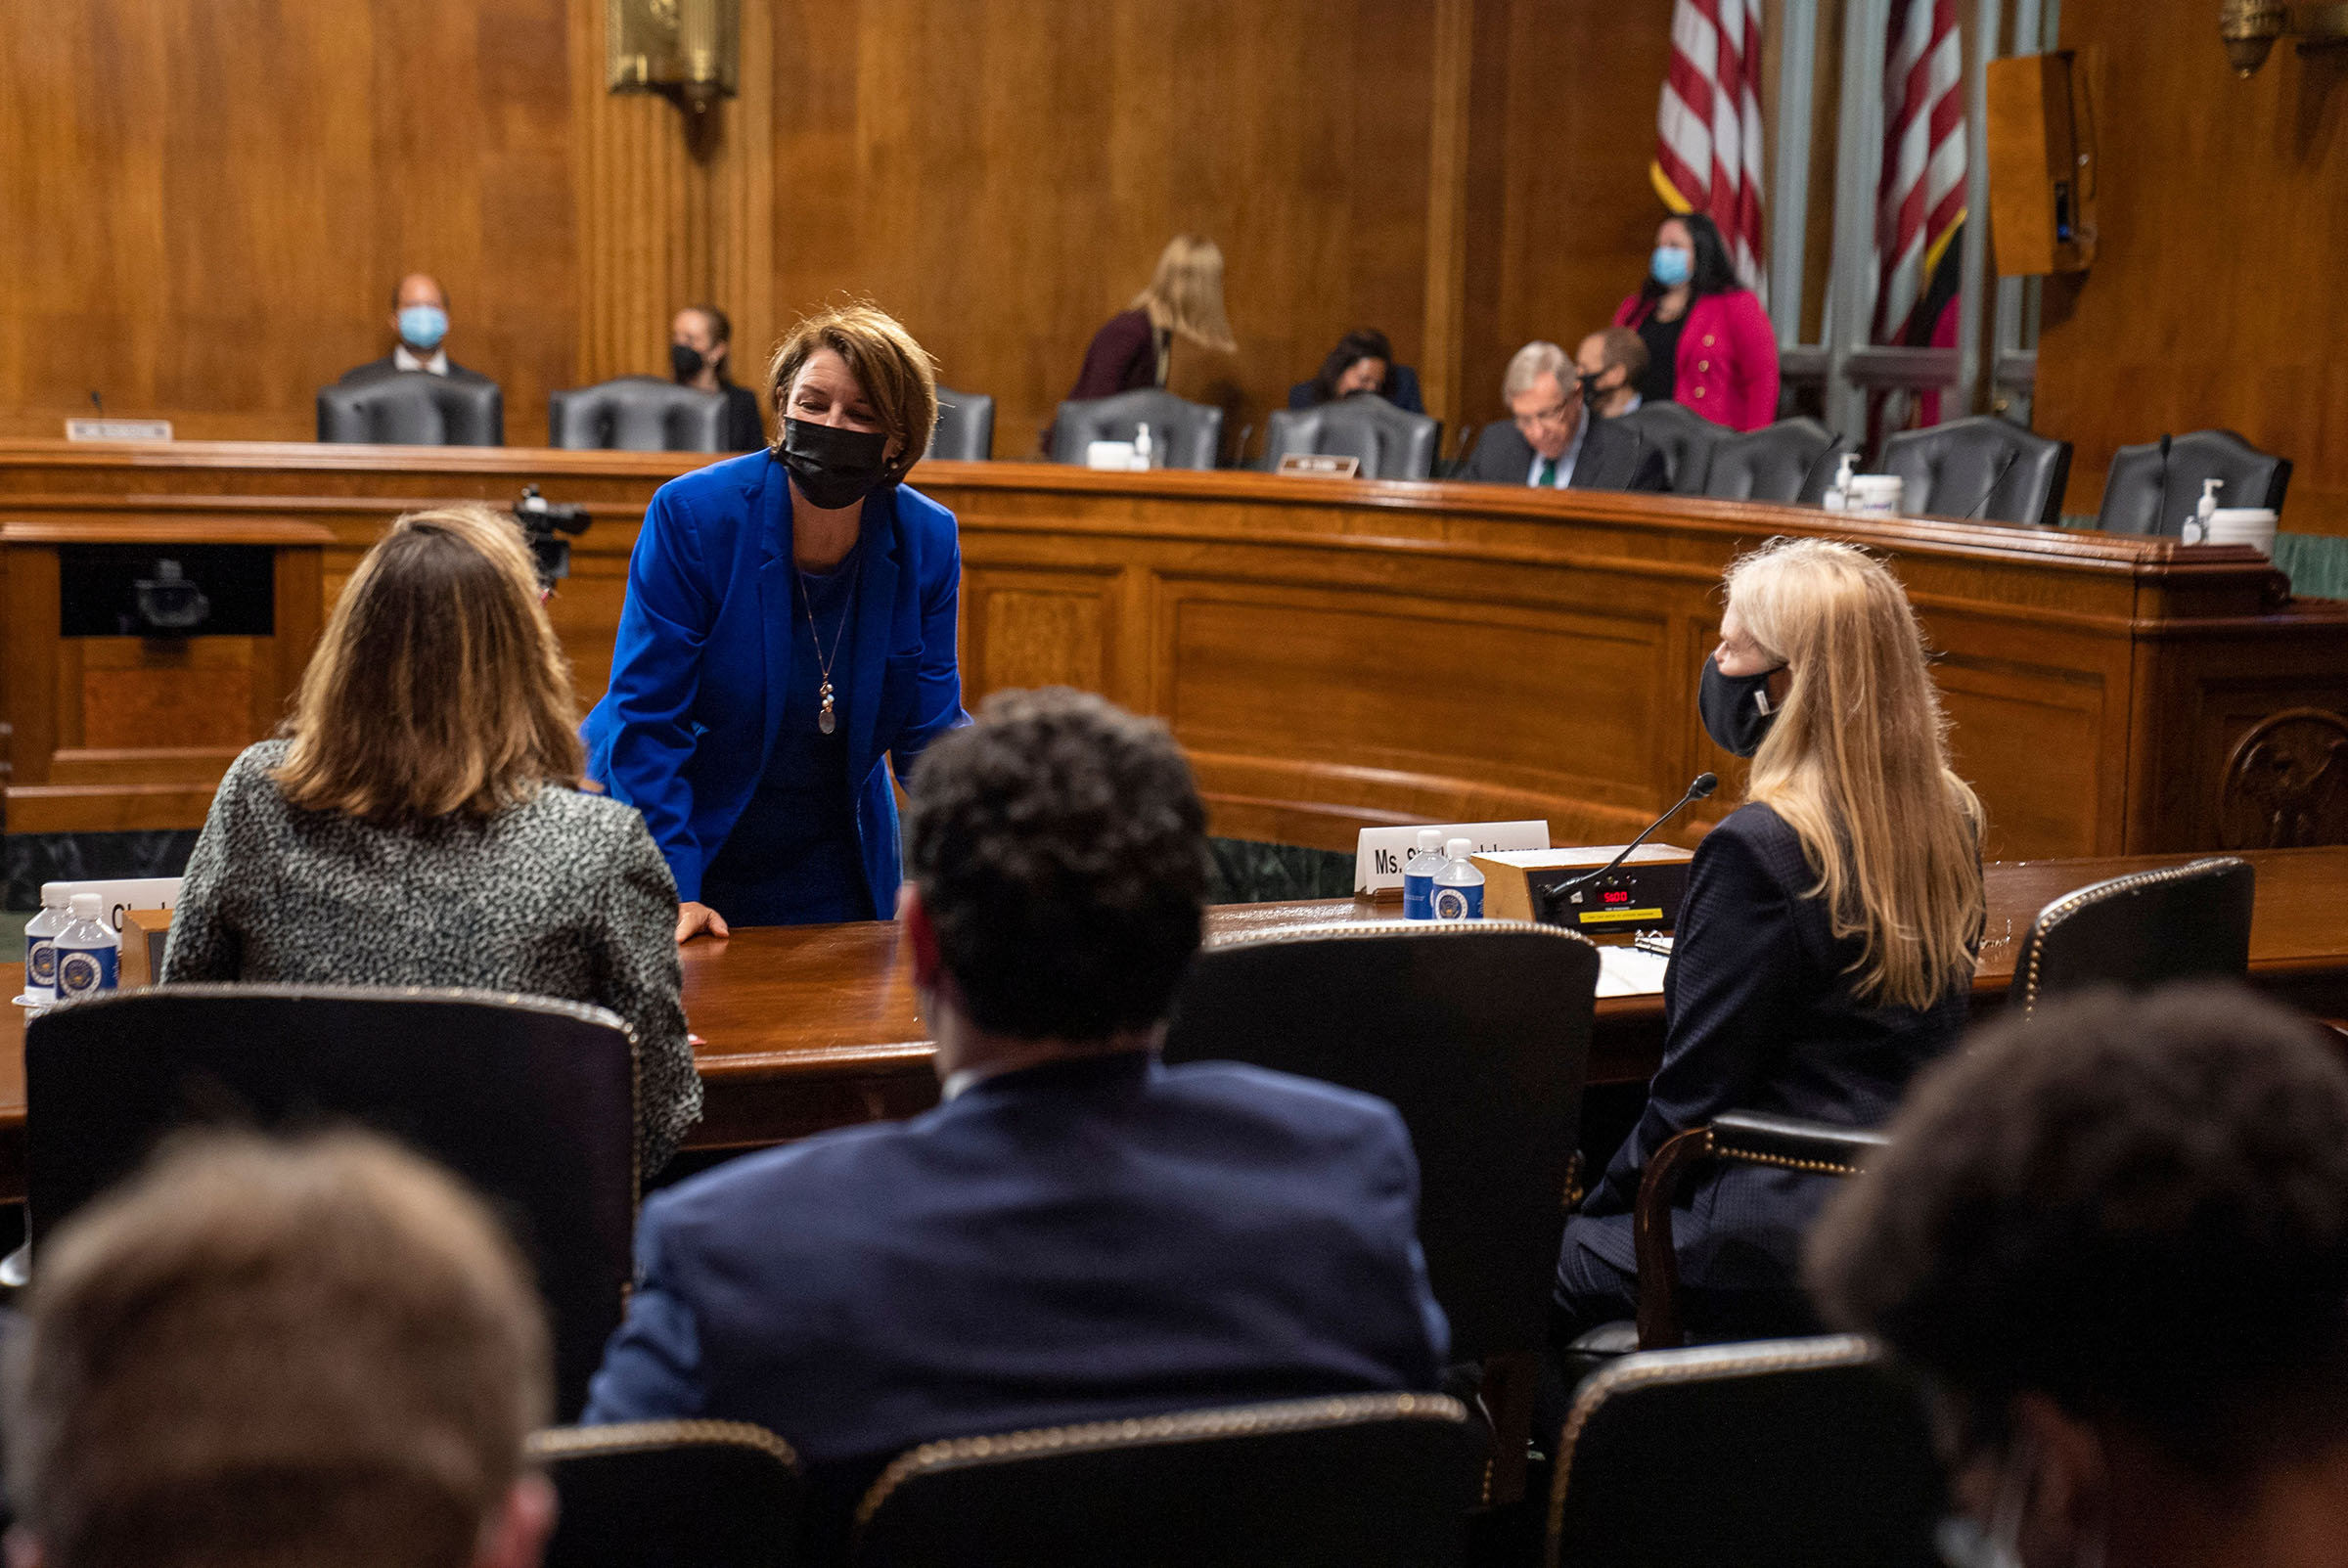 Sen. Amy Klobuchar greets Charlotte Slaiman, Competition Policy director at Public Knowledge, before a hearing of the Judiciary Subcommittee on Competition Policy, Antitrust, and Consumer Rights in Washington, D.C., on Sept. 21, 2021. (Ken Cedeno/AFP/Getty Images)